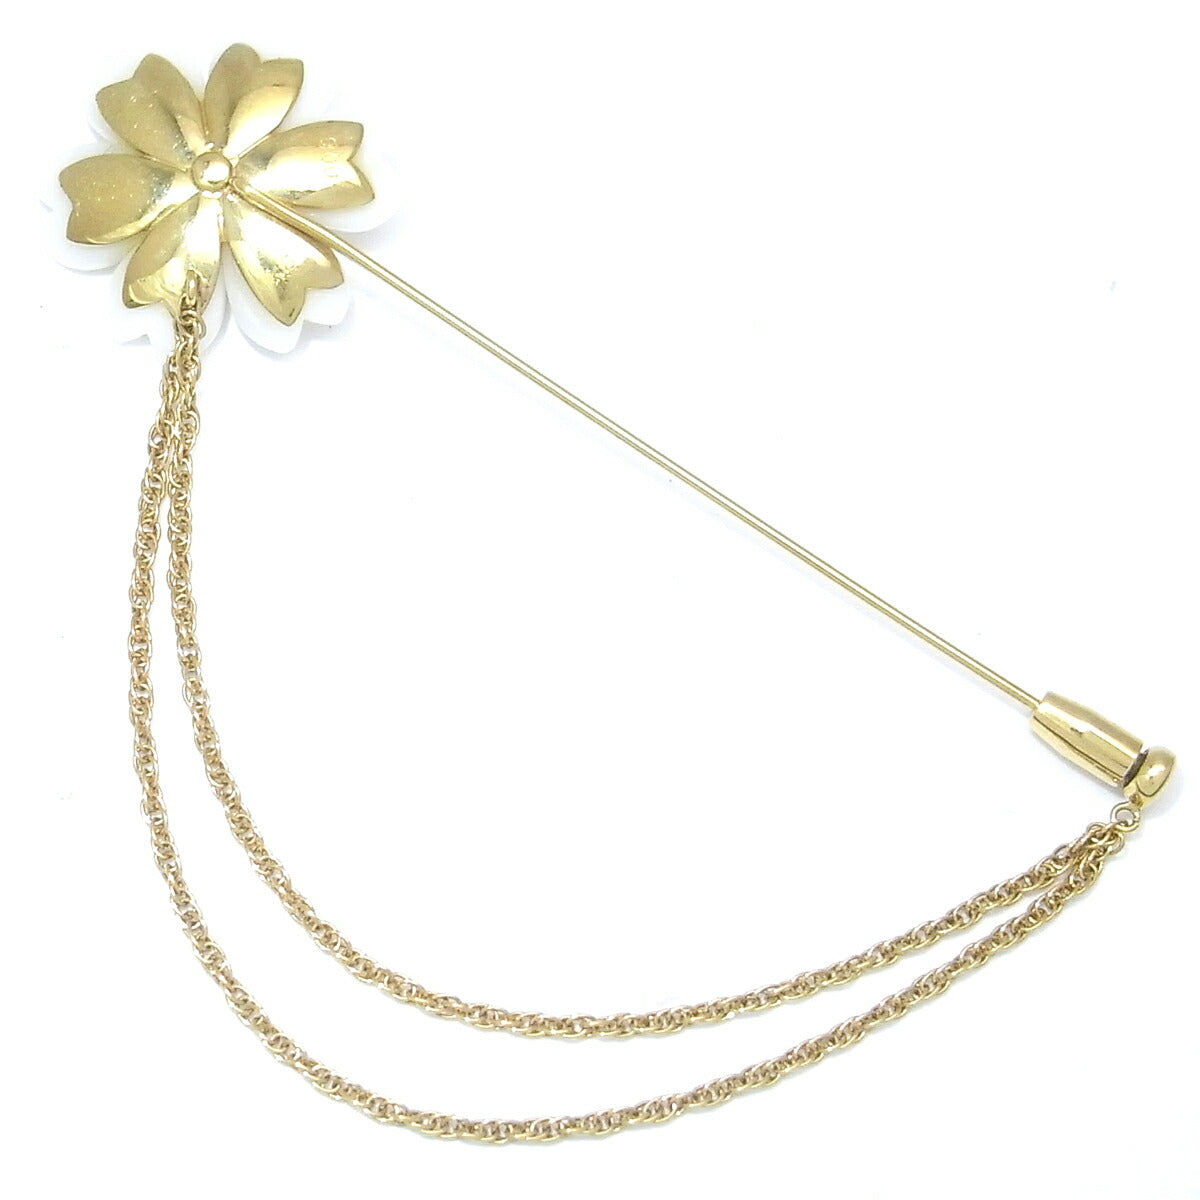 Non-Brand Coral, Diamond Pin Brooch in K18 Yellow Gold for Women